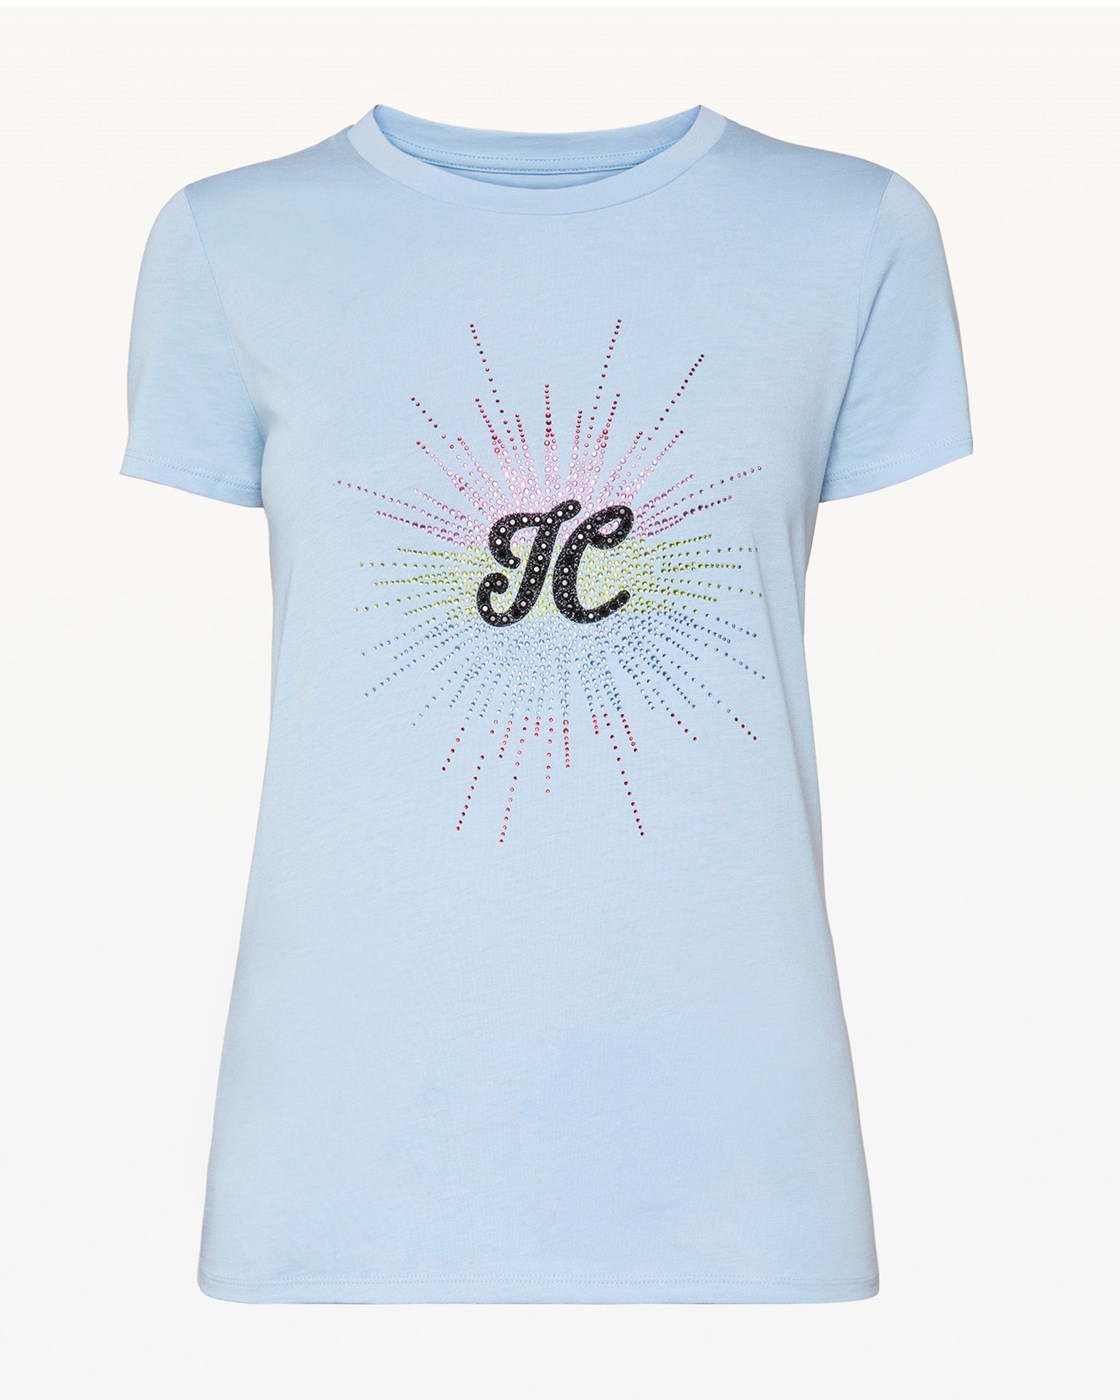 Juicy Couture Ombre Crystal Burst Tee